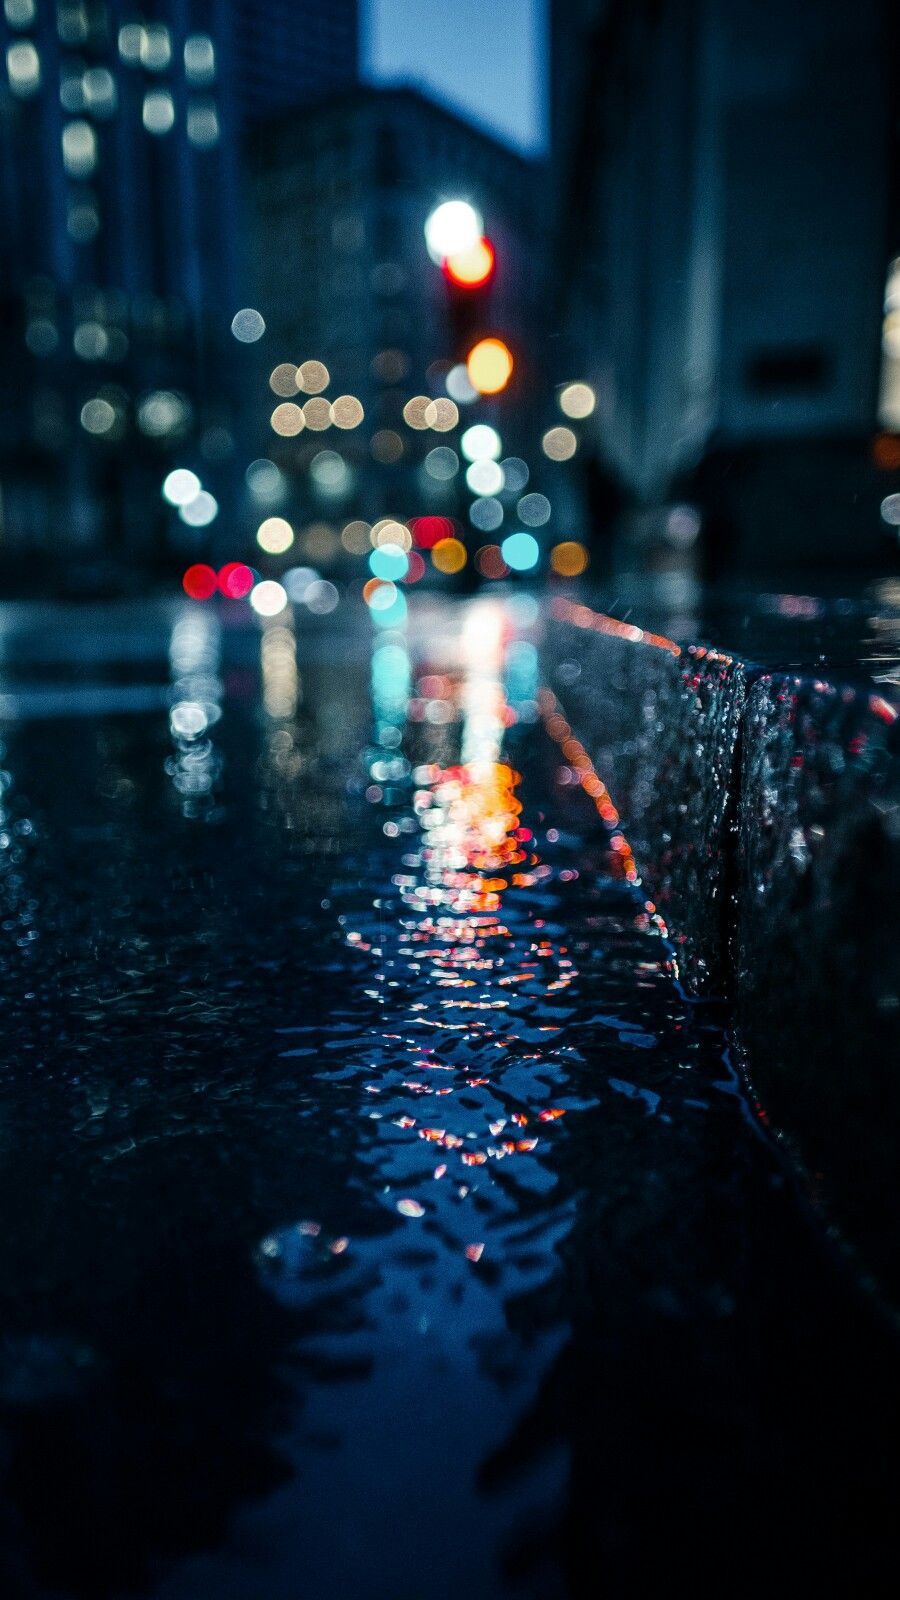 City Lights Reflection In Water Wallpapers